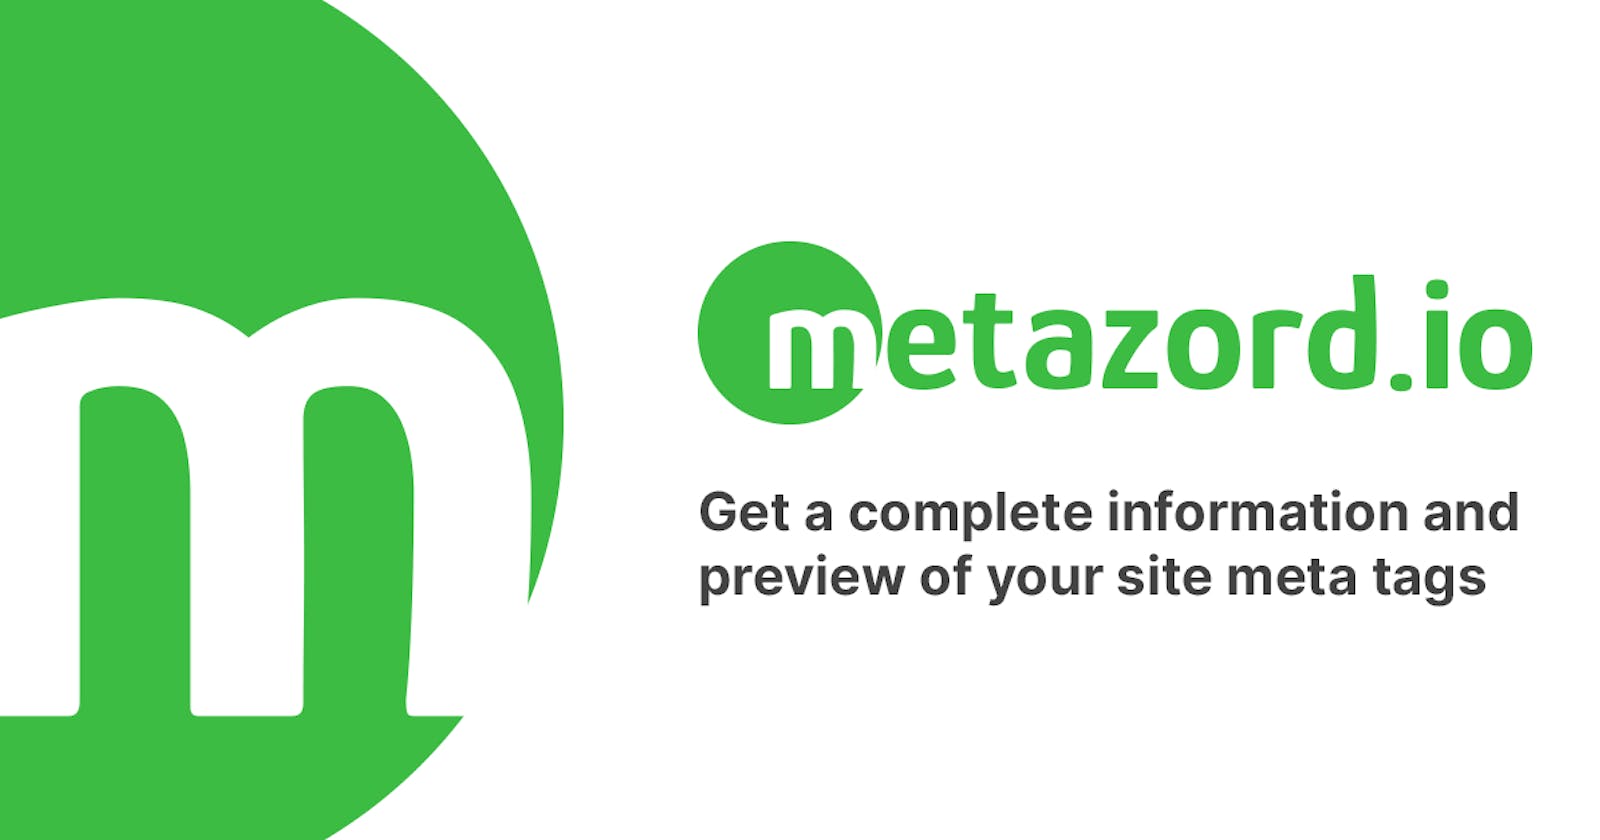 metazord.io | Site meta tags information and live preview